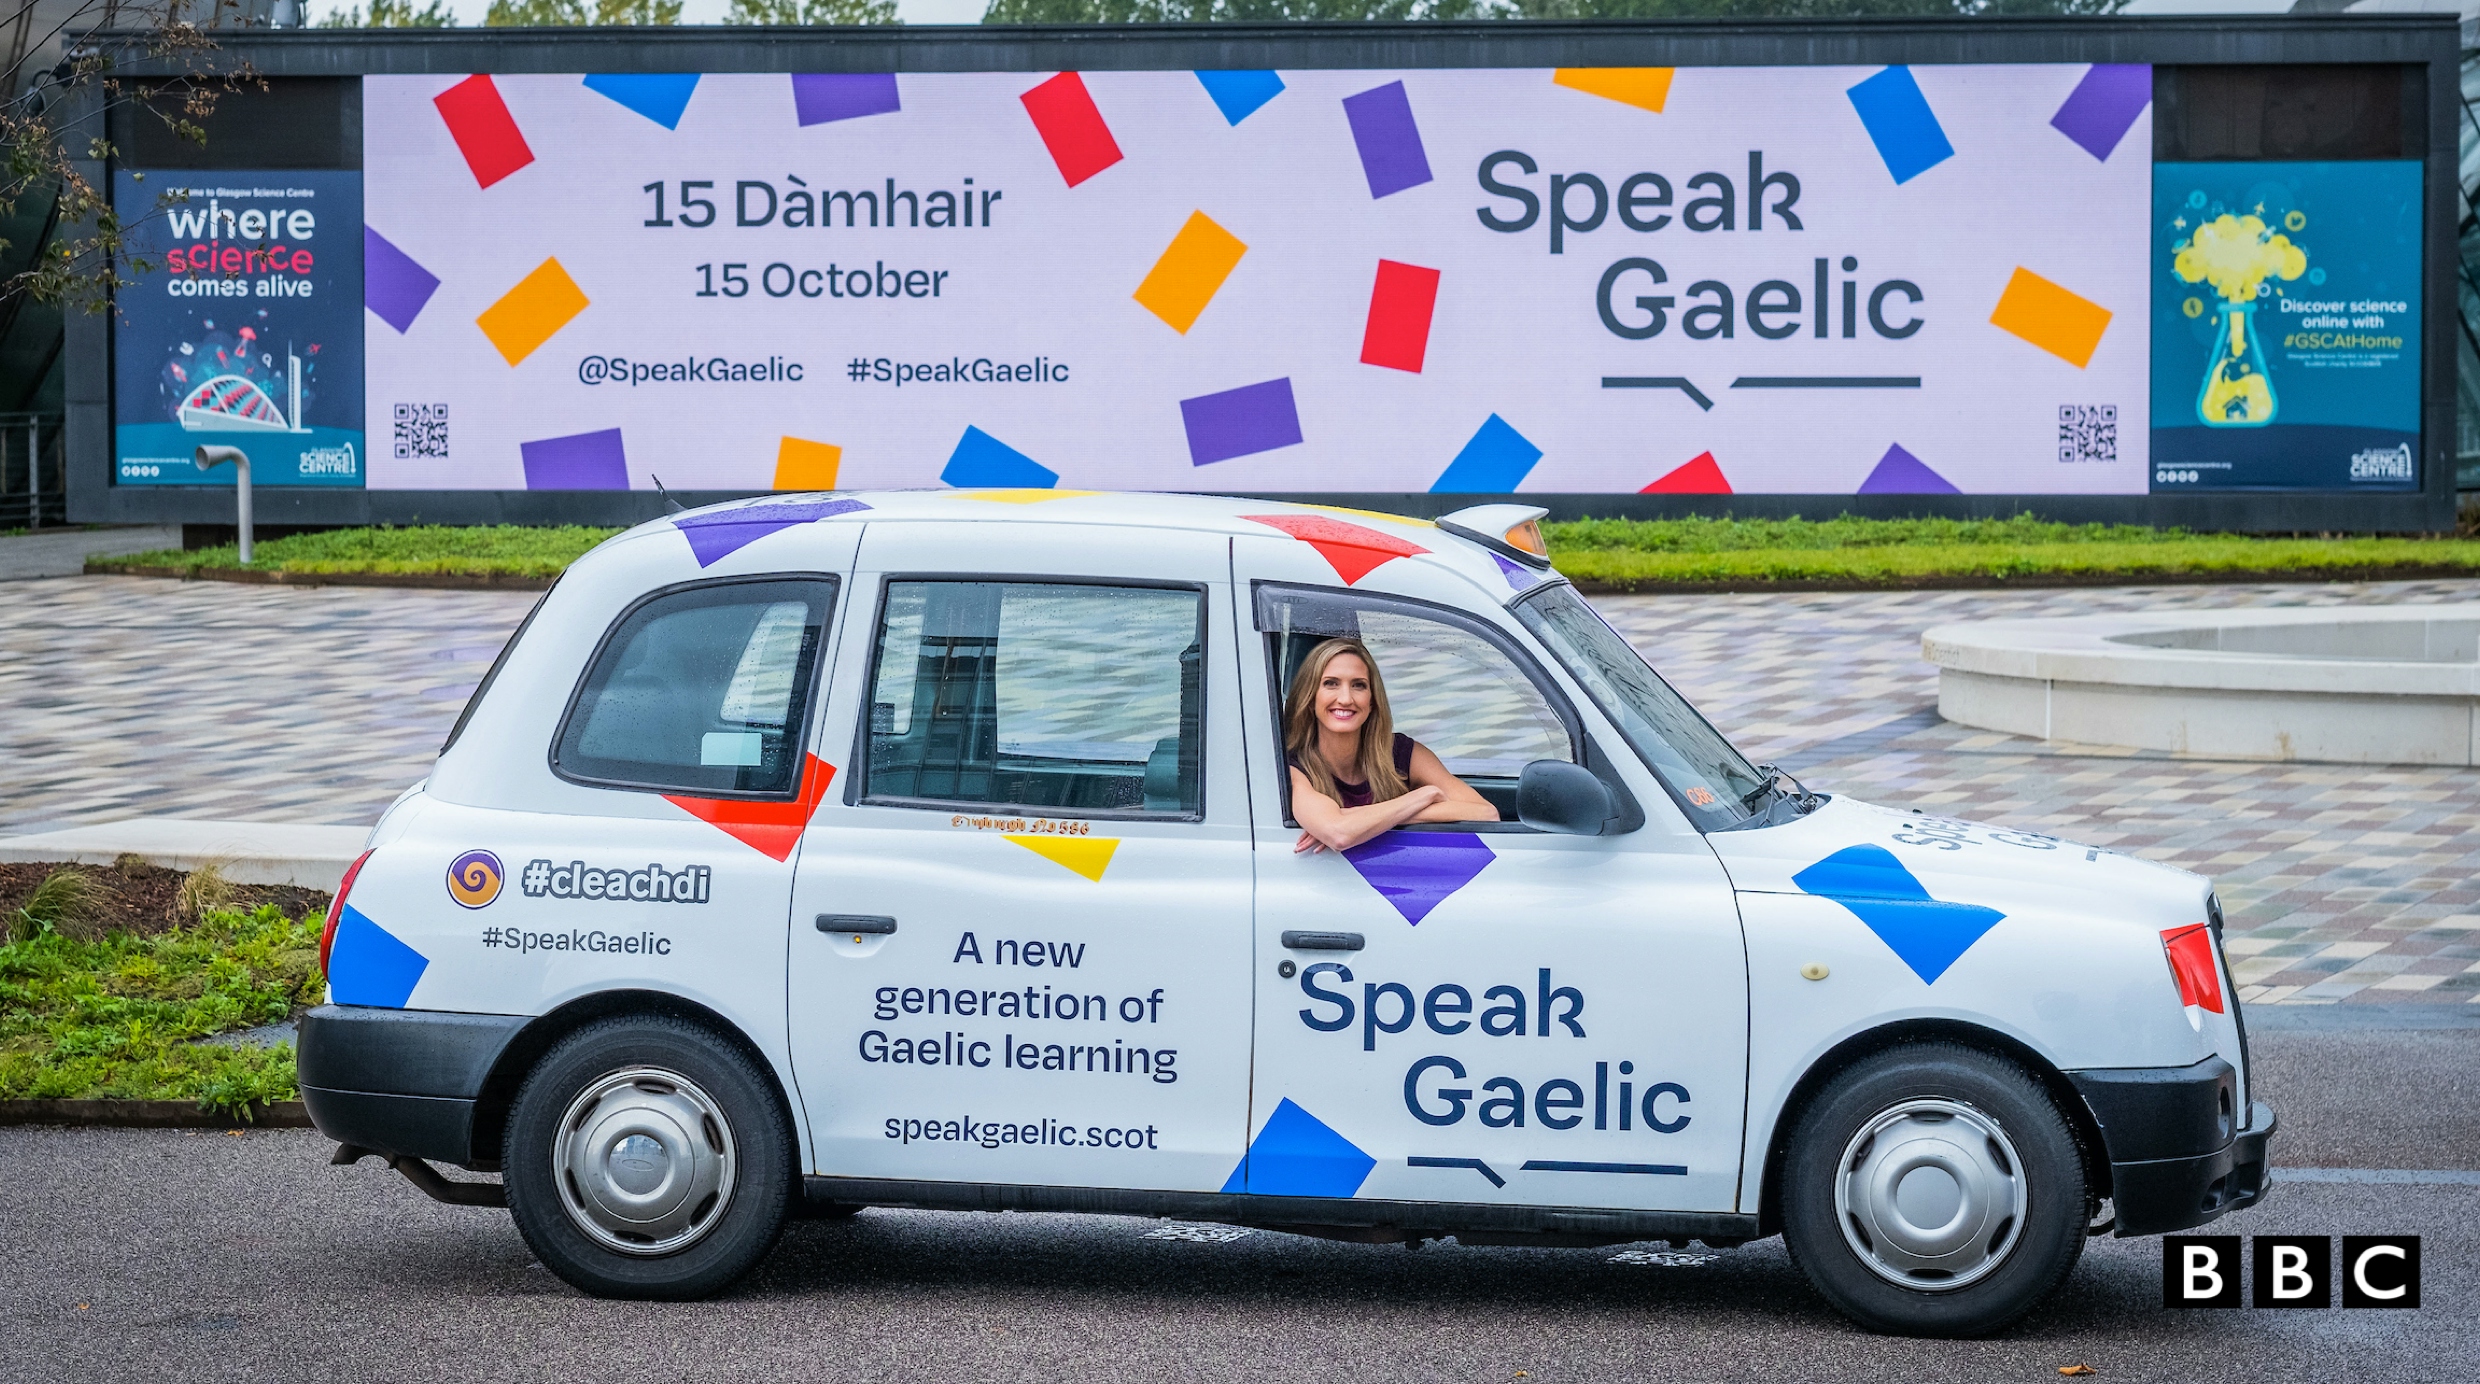 Joy Dunlop sits in the driver’s seat of a white SpeakGaelic branded taxi in in front of a SpeakGaelic billboard